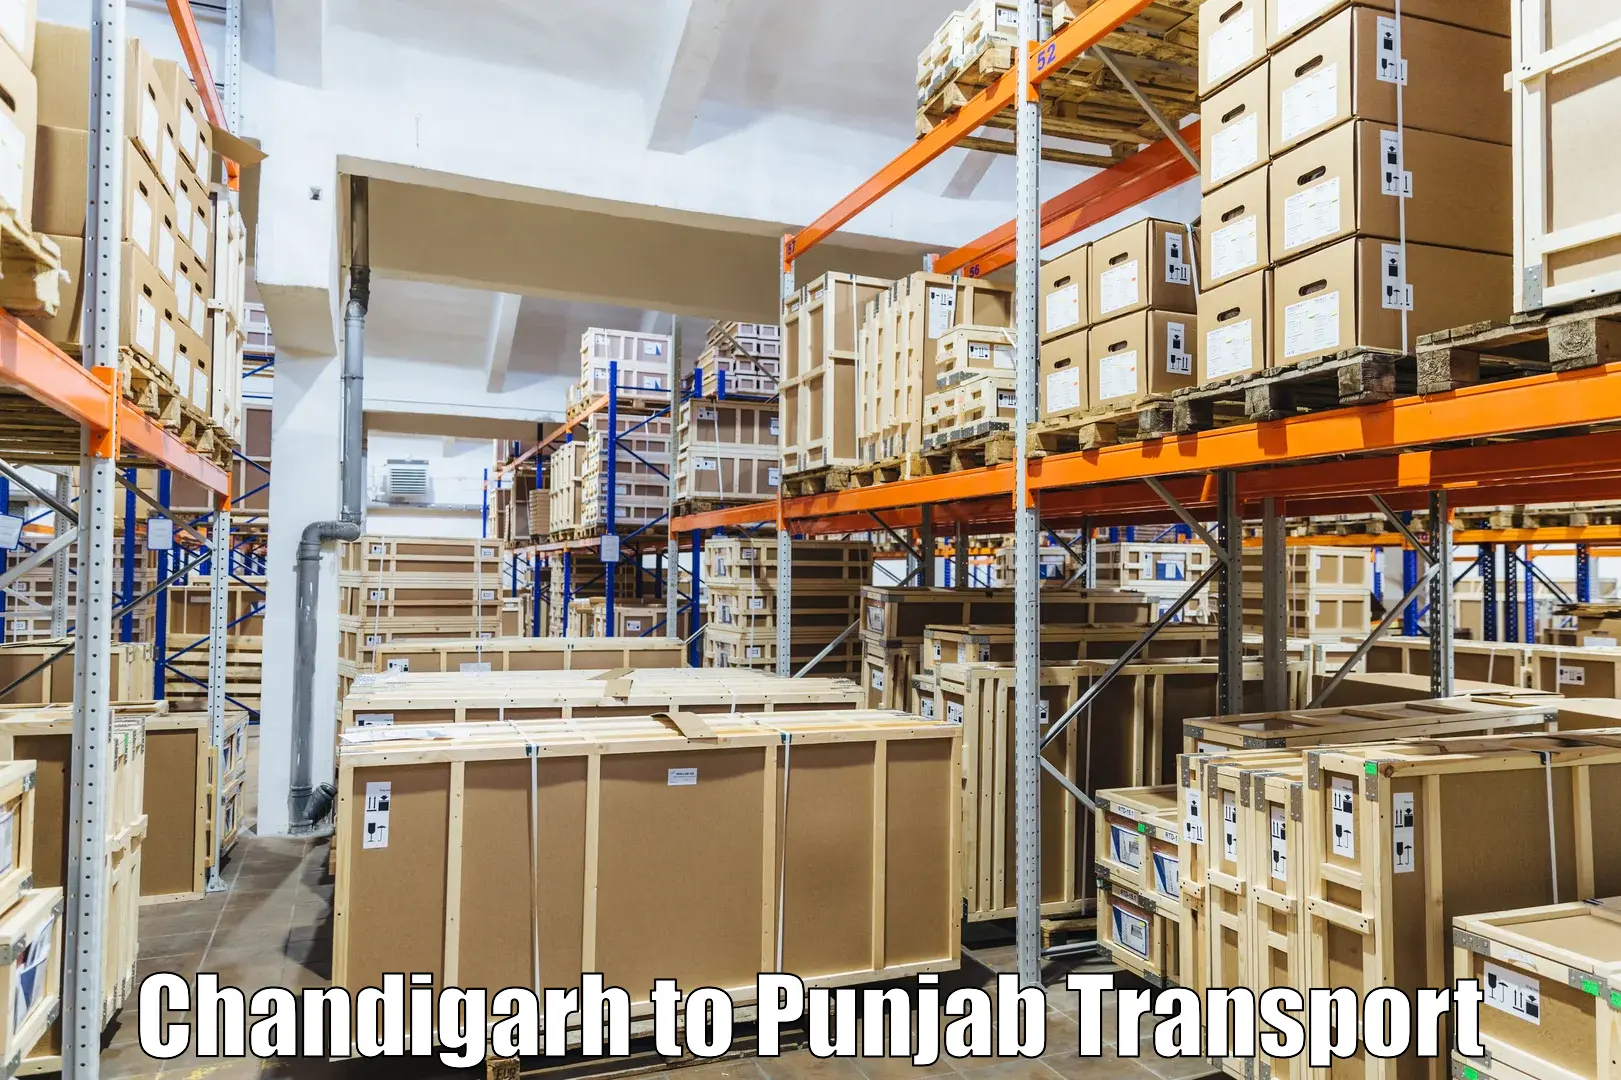 Air freight transport services Chandigarh to Ludhiana